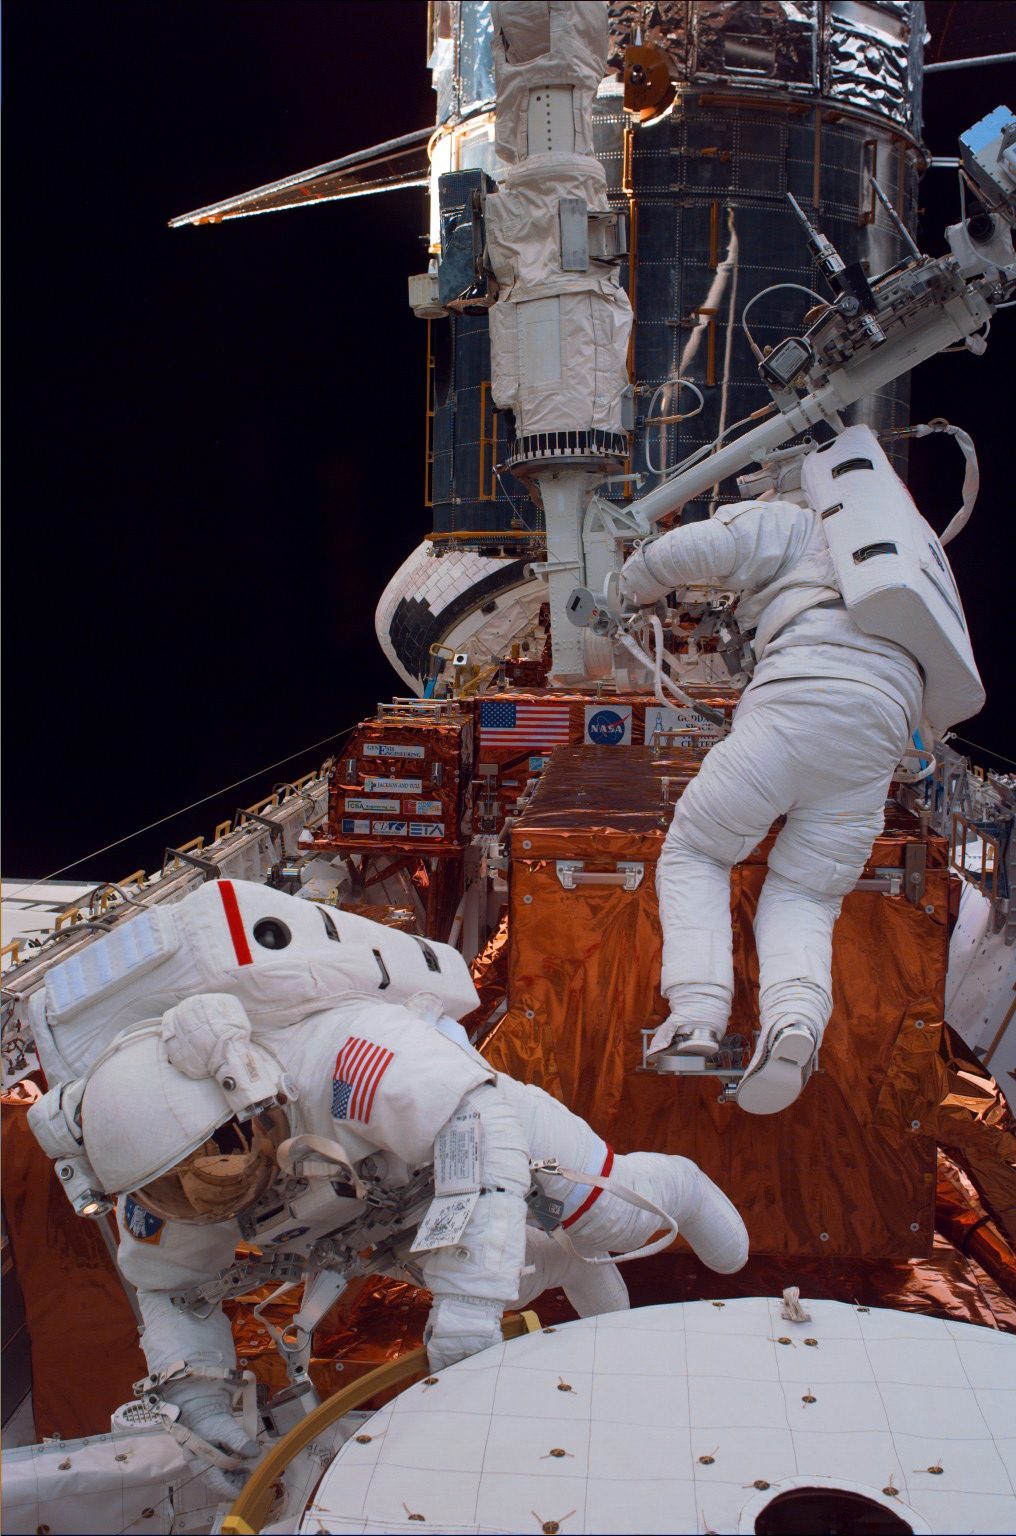 Two astronauts work on Hubble in the space shuttle's cargo bay.